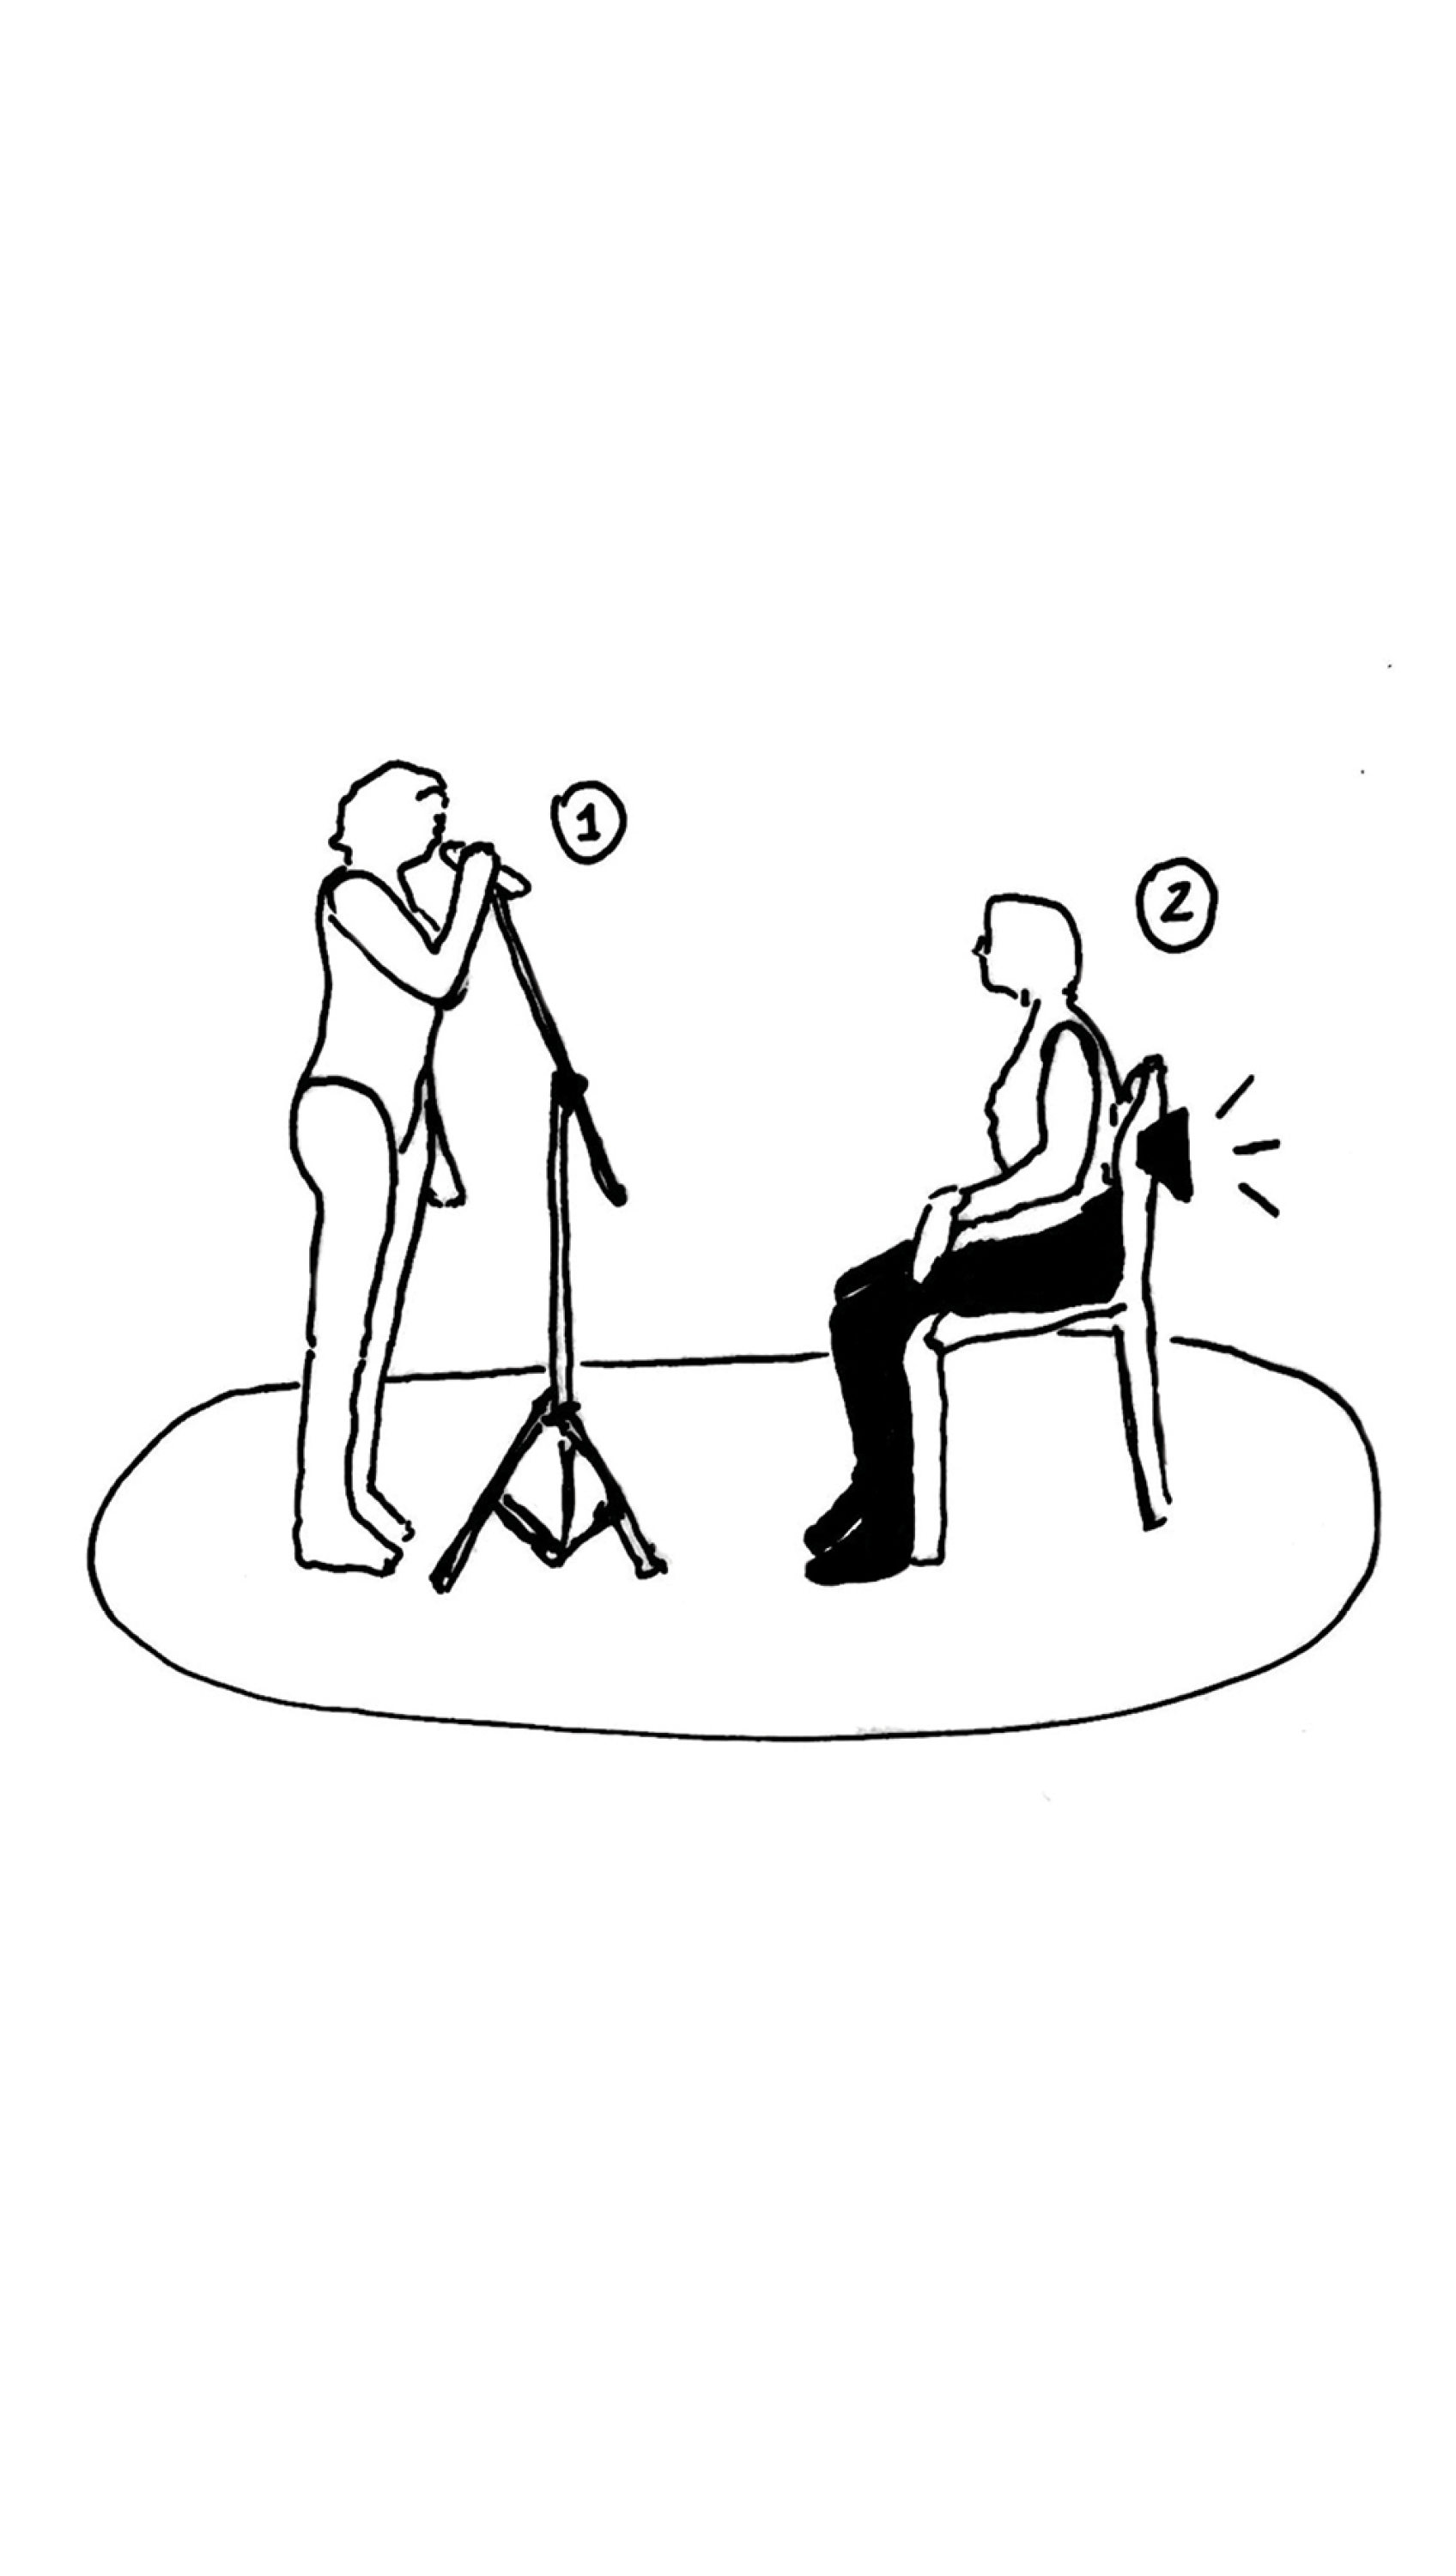 Sketch of 'Inside Voice' (2018) showing a person talking to a microphone in front of someone sitting on a chair with a speaker attached to the back.